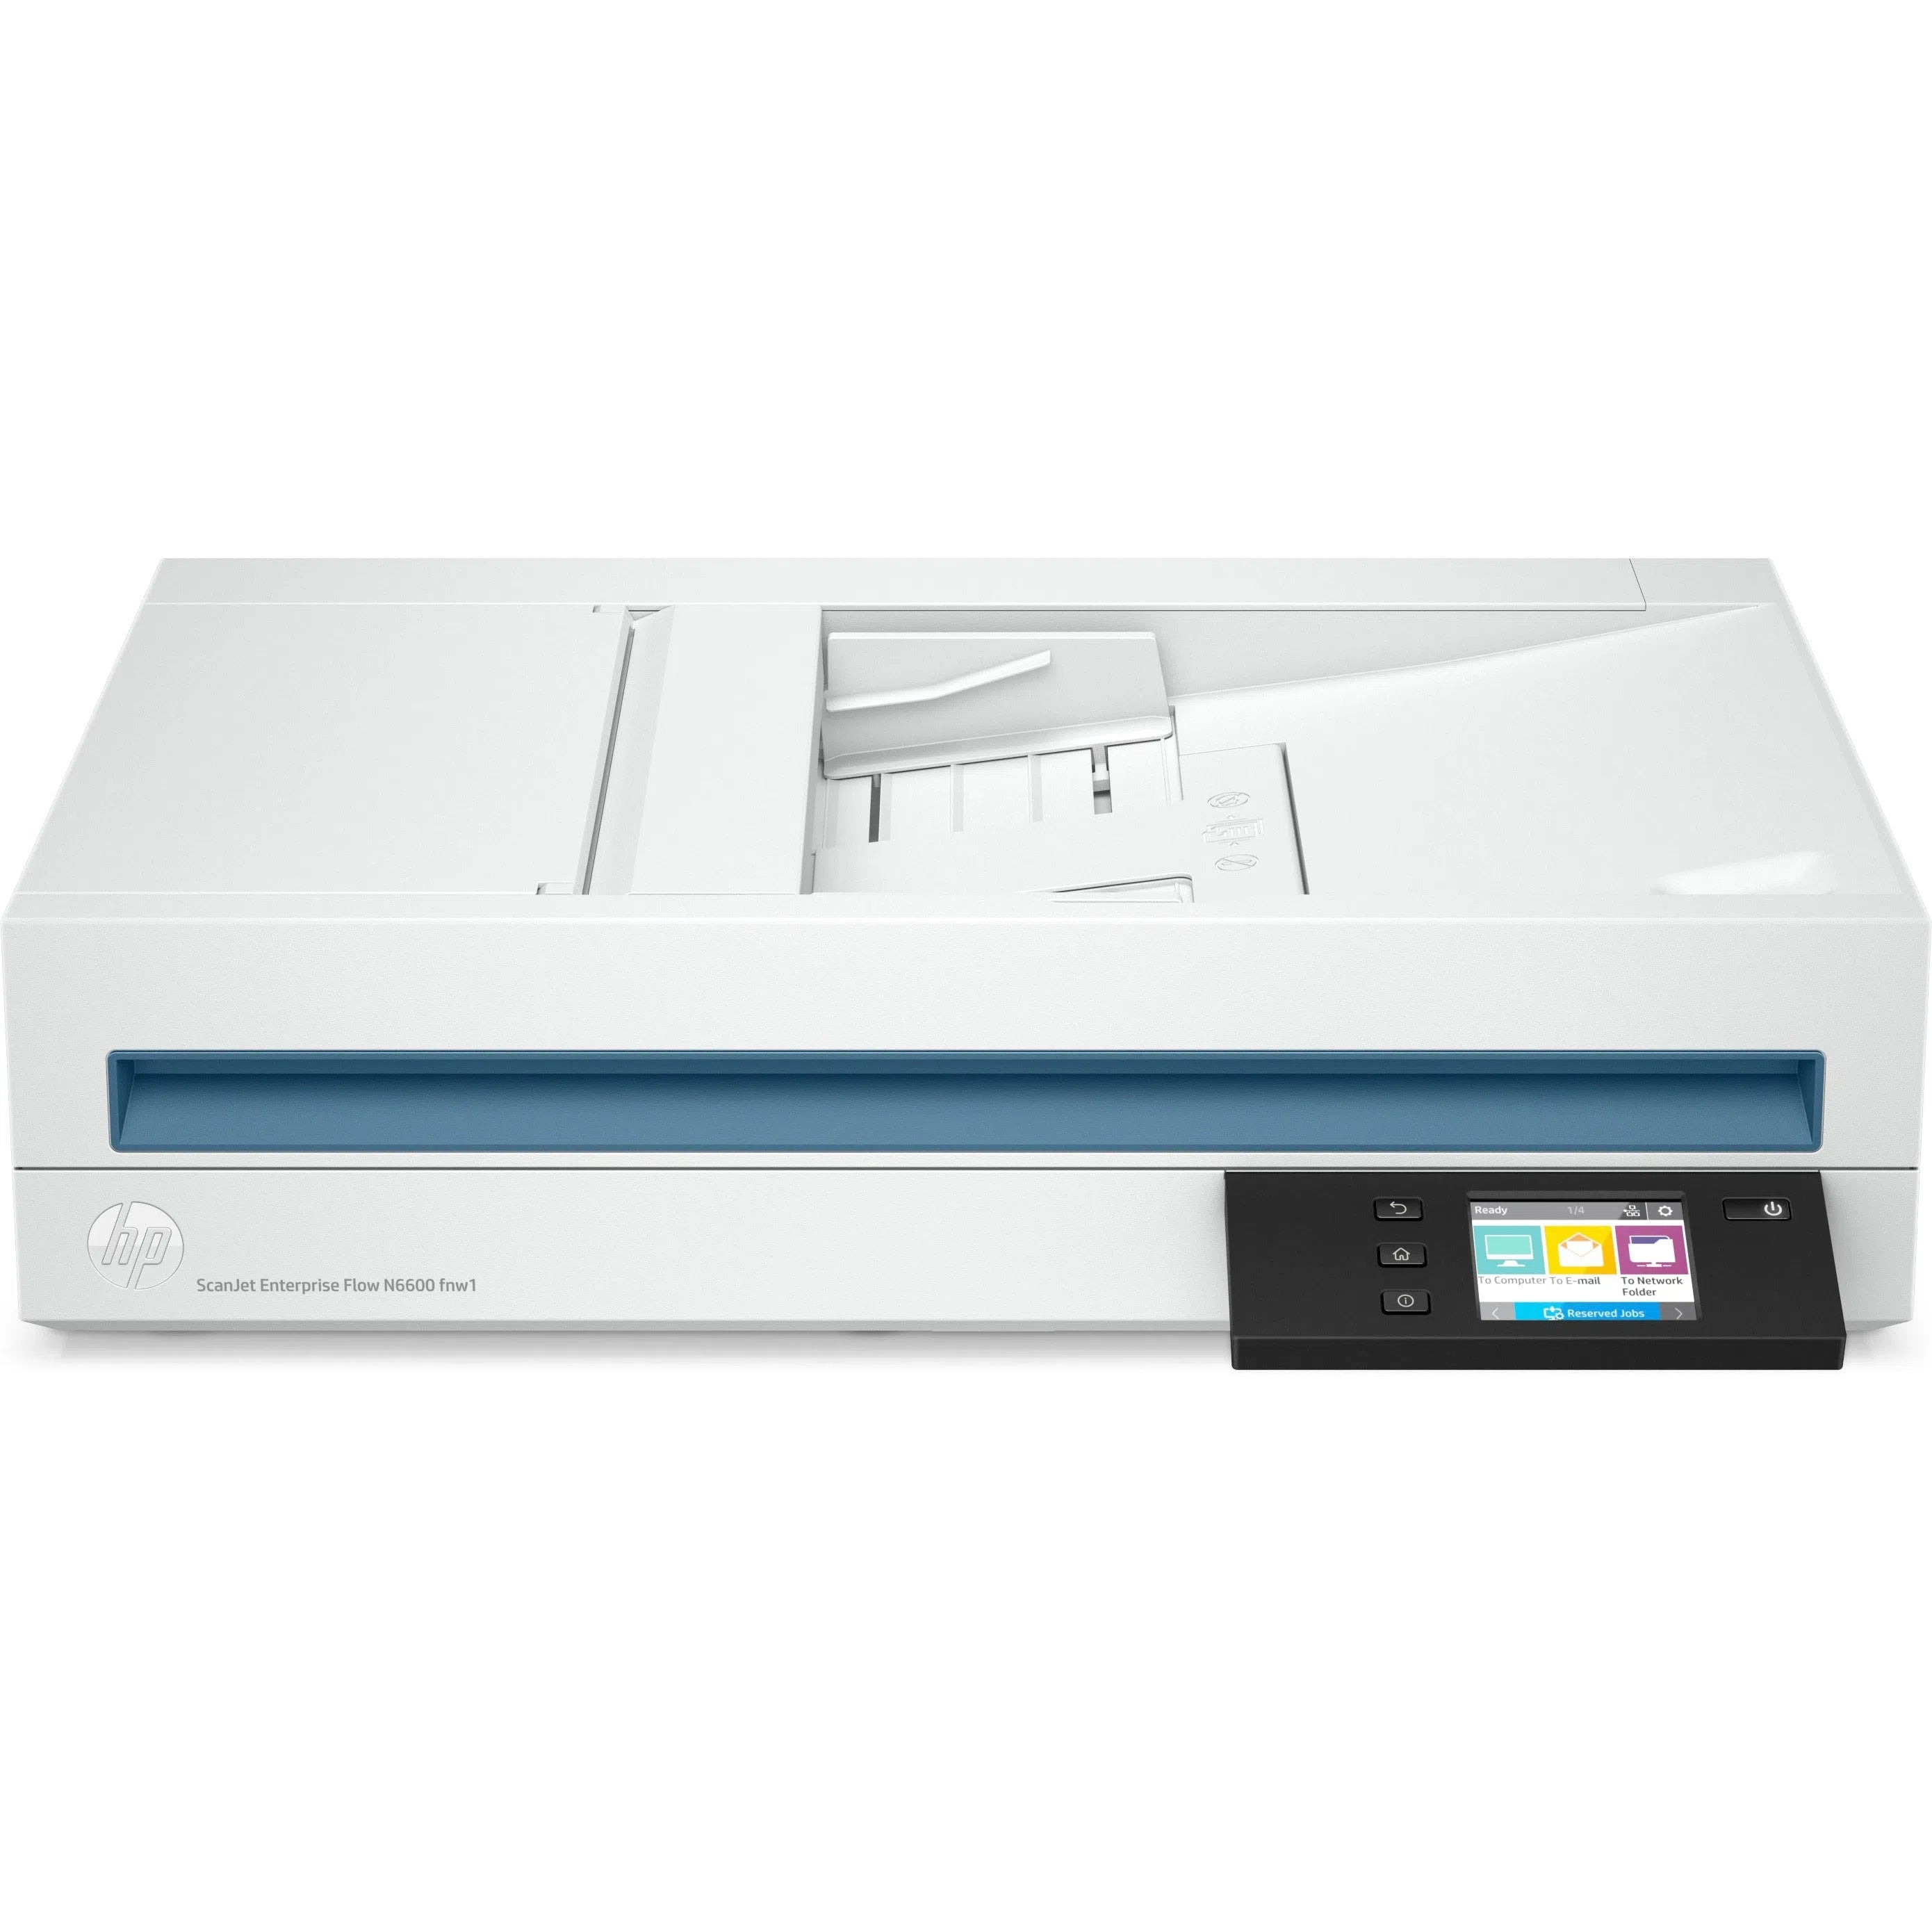 HP SCANNER TYPE ADF; CIS SCANNING TECHNOLOGY; FLATBED; SCAN TECHNOLOGY: ADF; FLATBED; CONTACT IMAGE SENSOR (CIS); SCAN INPUT MODES: SCAN FRONT-PANEL FUNCTION : SCAN TO COMPUTER, SCAN TO E-MAIL, SCAN TO NETWORK FOLDER, SCAN TO SHARE FOLDER, SCAN TO USB ...